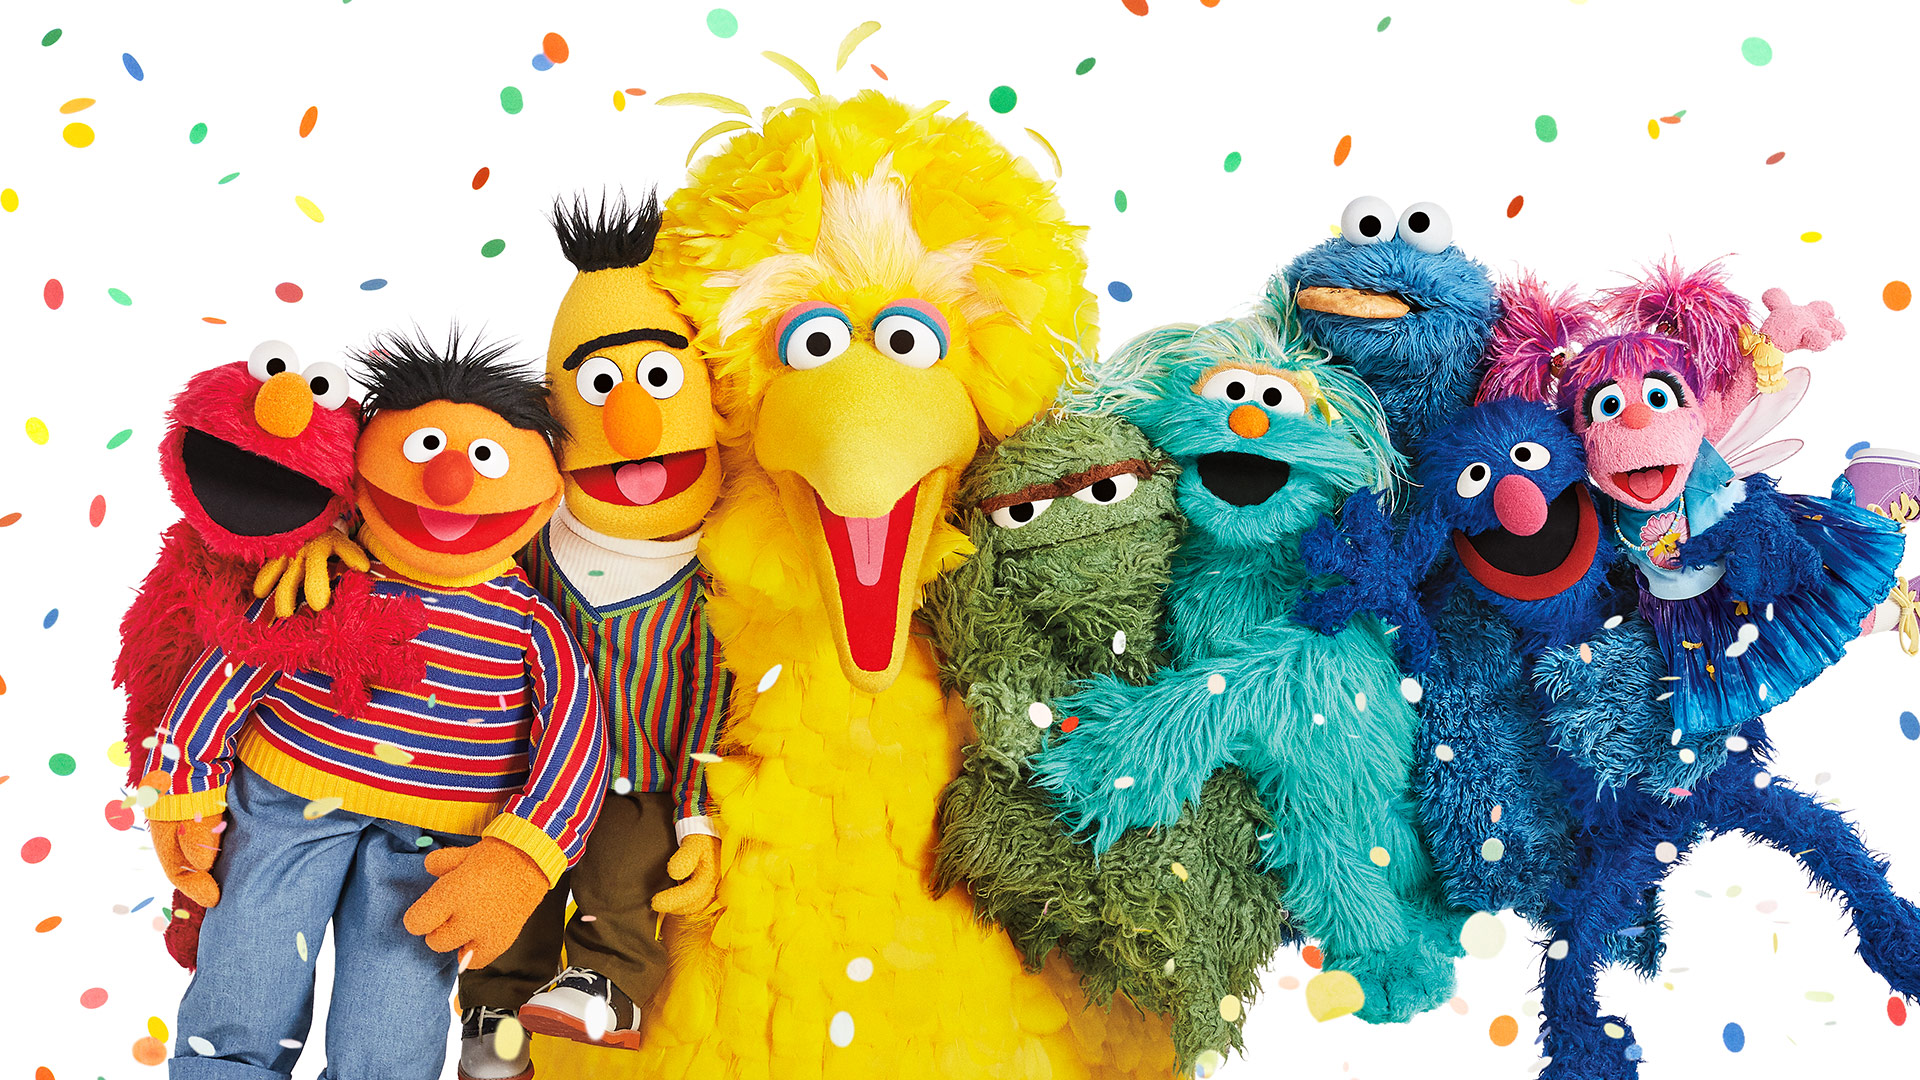 Sesame Street eBooks are free on Amazon, Google Play, and other platforms